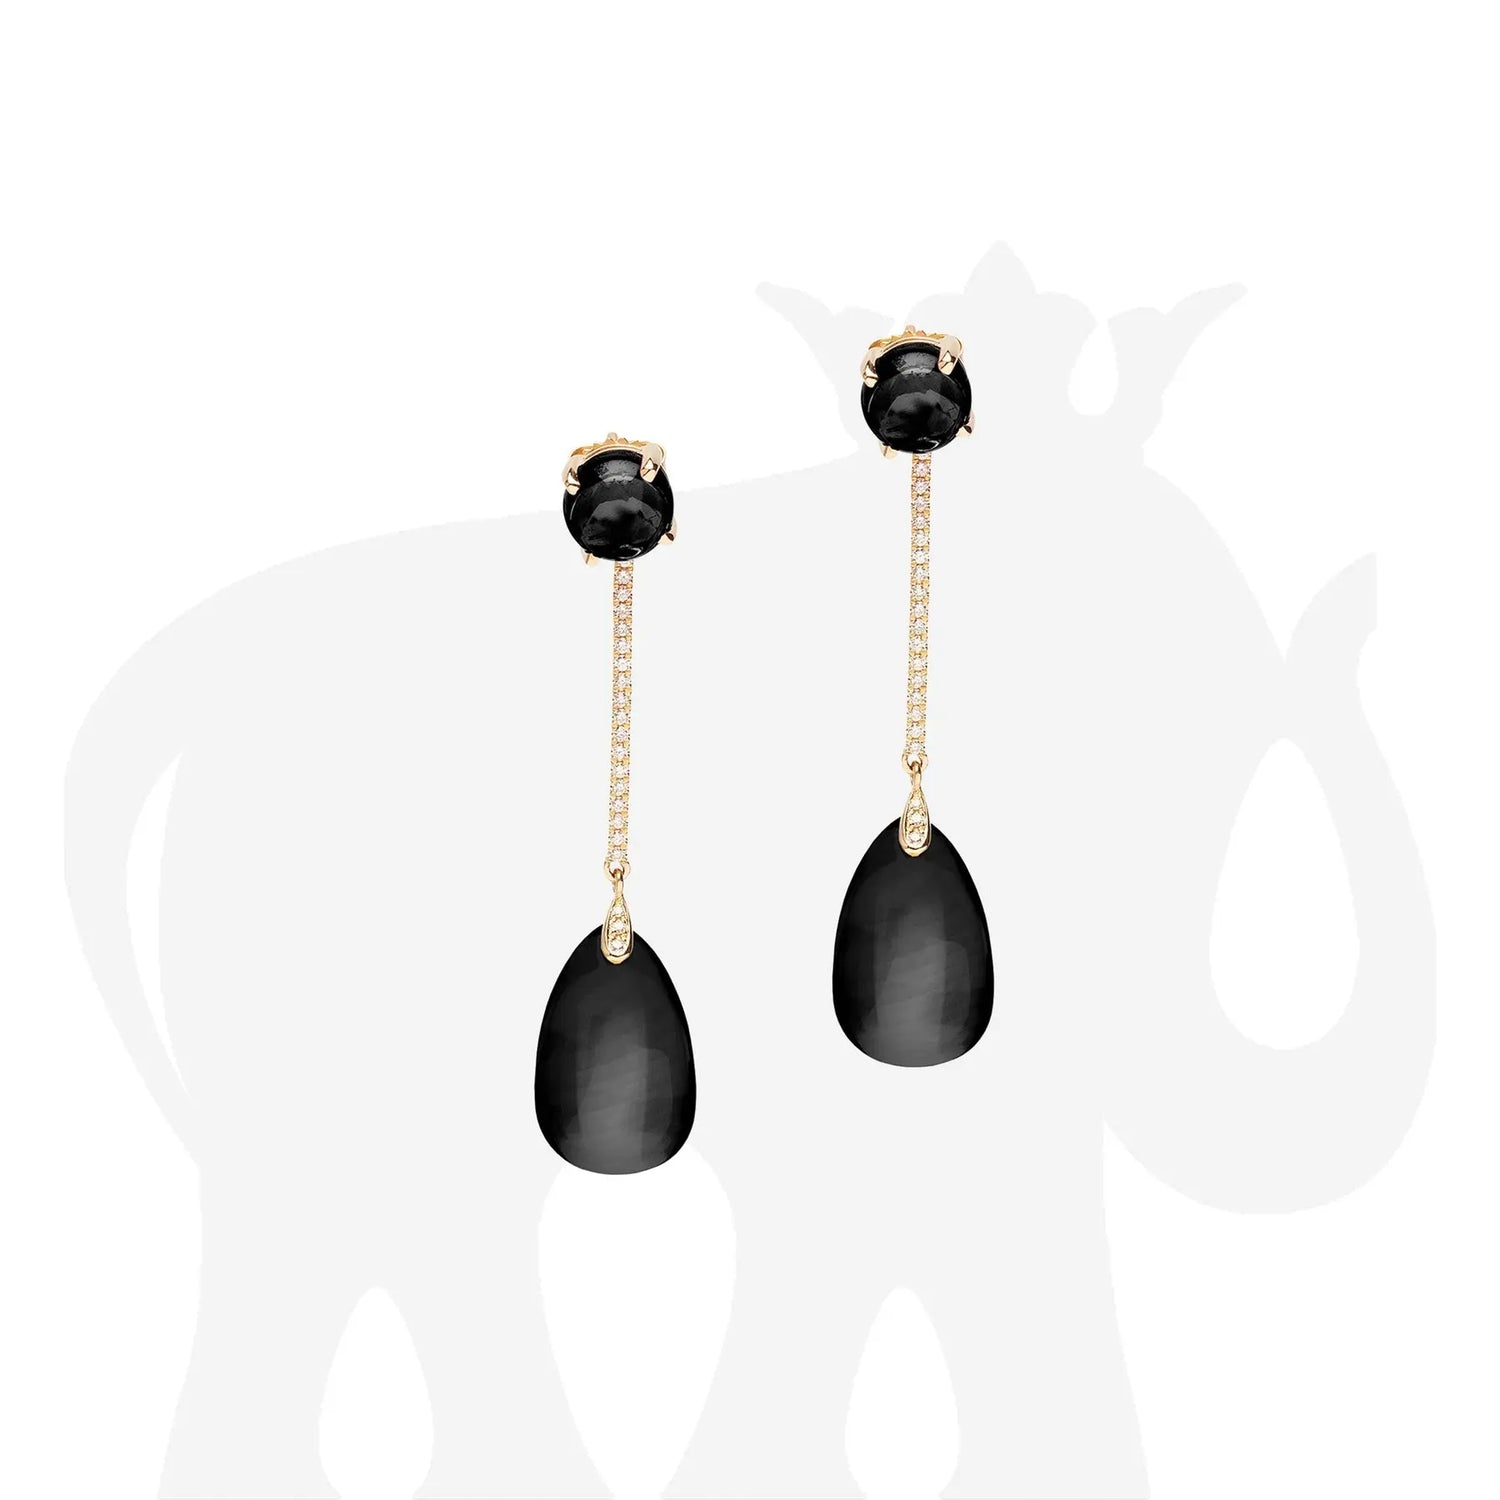 Naughty' Onyx Cabochon & Drop Long Earrings with Diamond in 18k yellow. The stone size is 19 x 12 mm & 8 mm. The onyx is 38.89 cttw and the diamonds are 0.28 cttw.